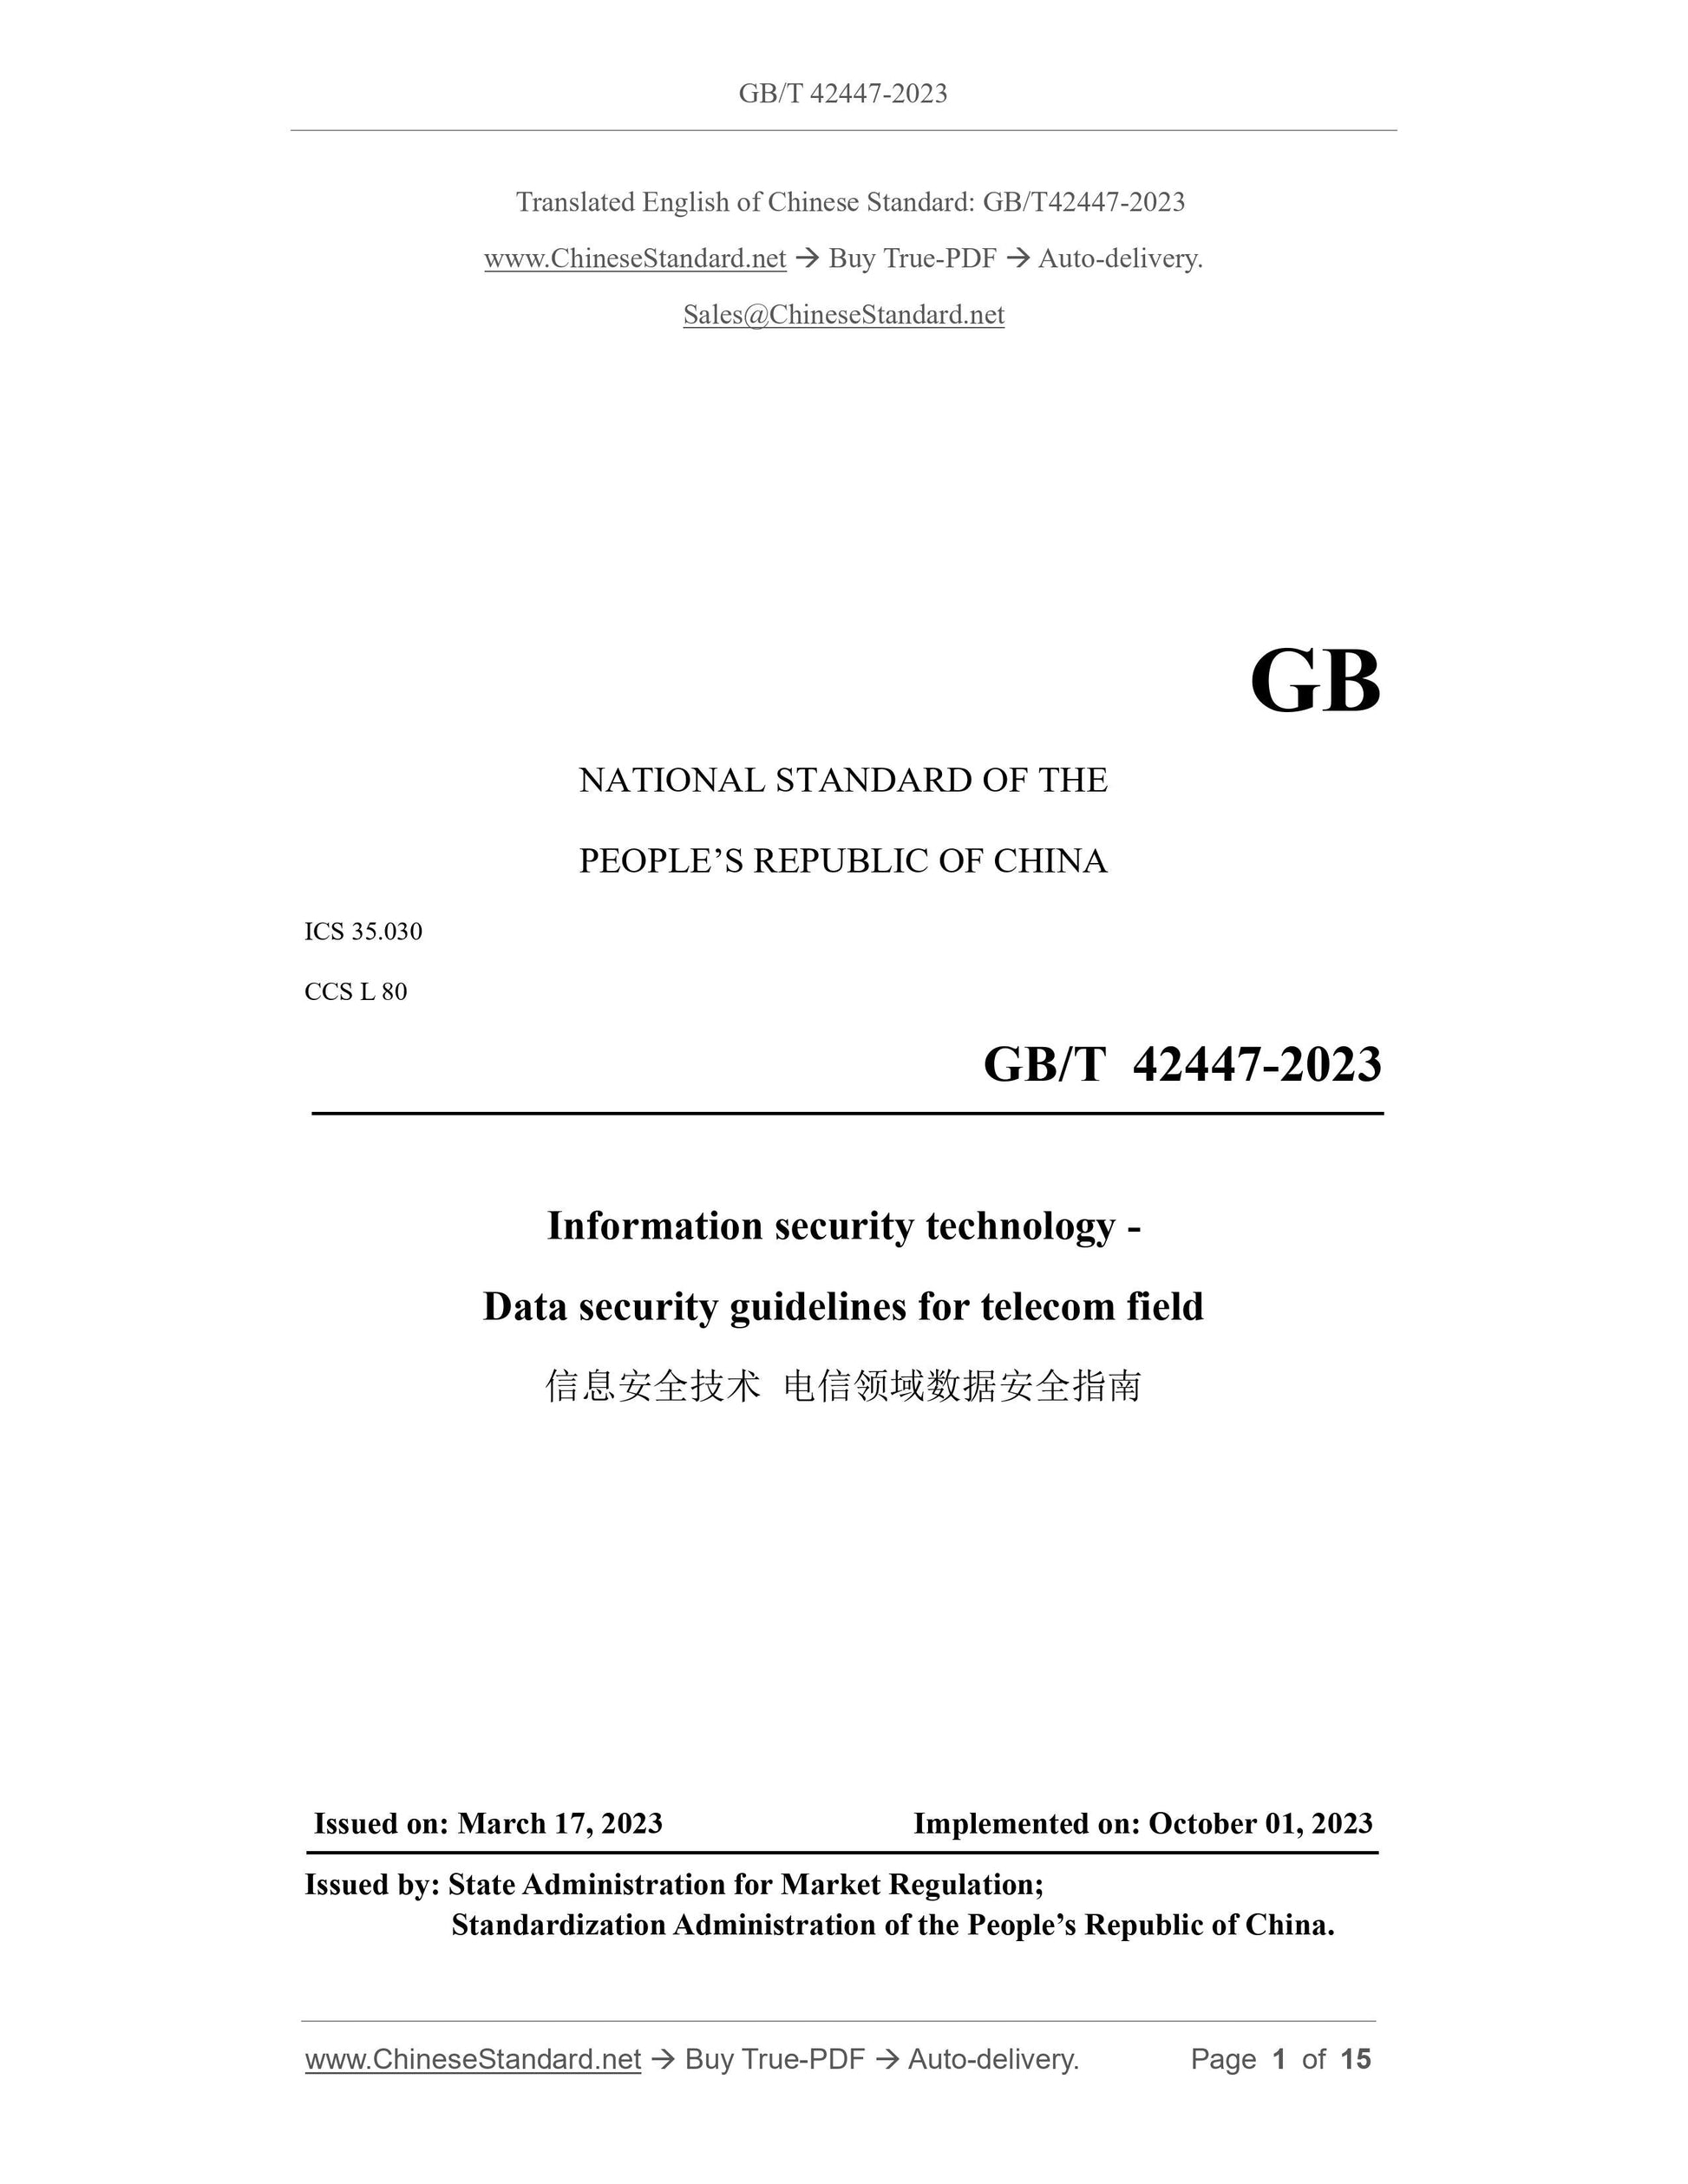 GB/T 42447-2023 Page 1